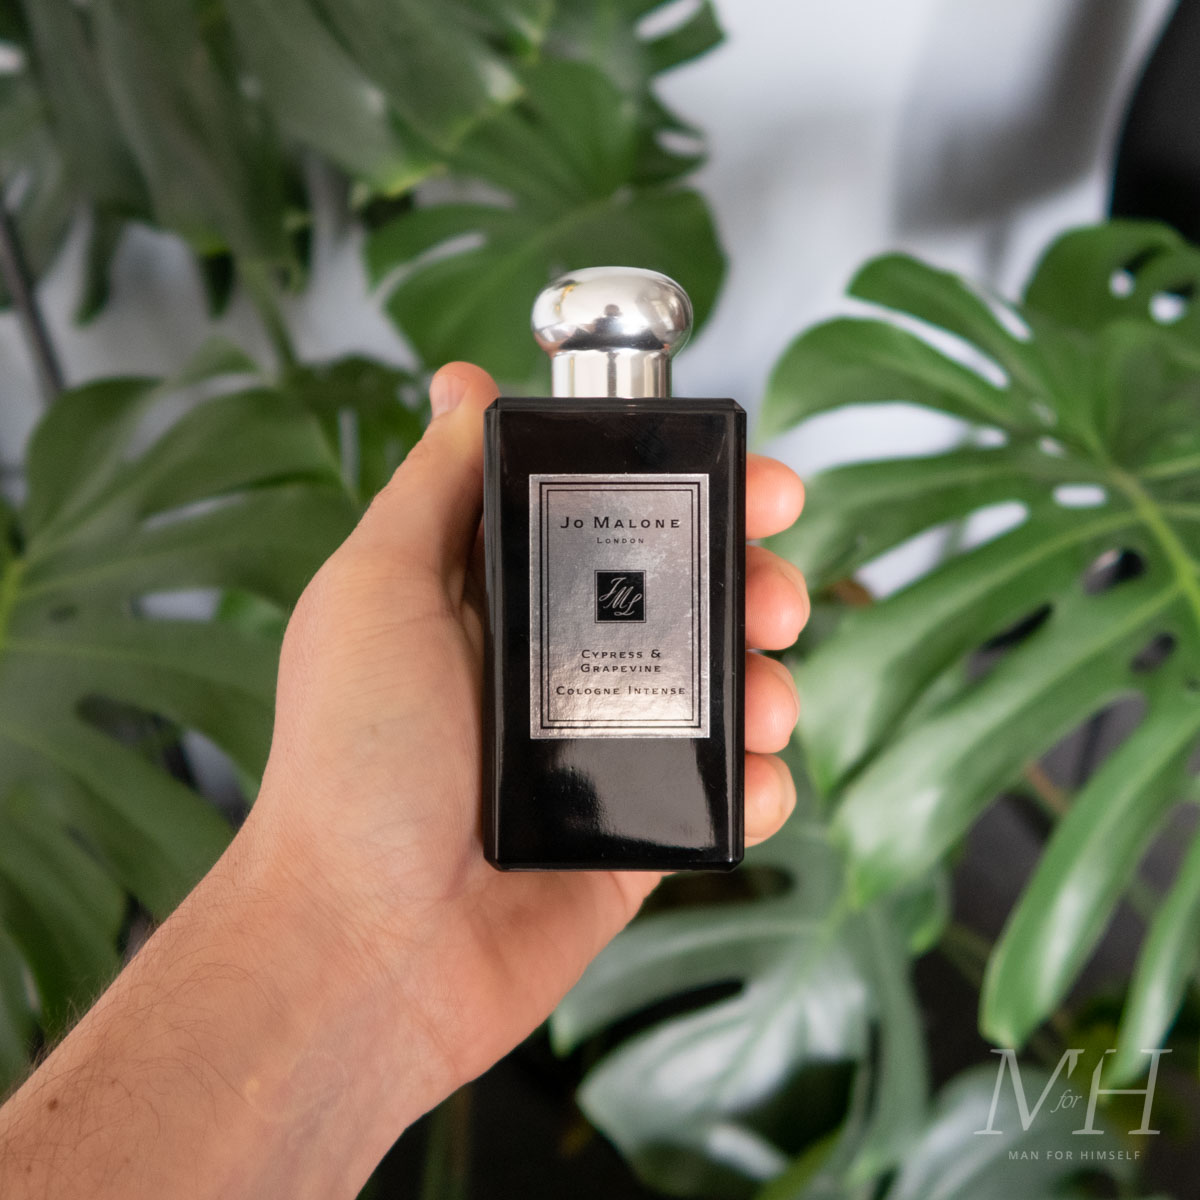 Jo Malone London on Instagram: The bold, bewitching scent of